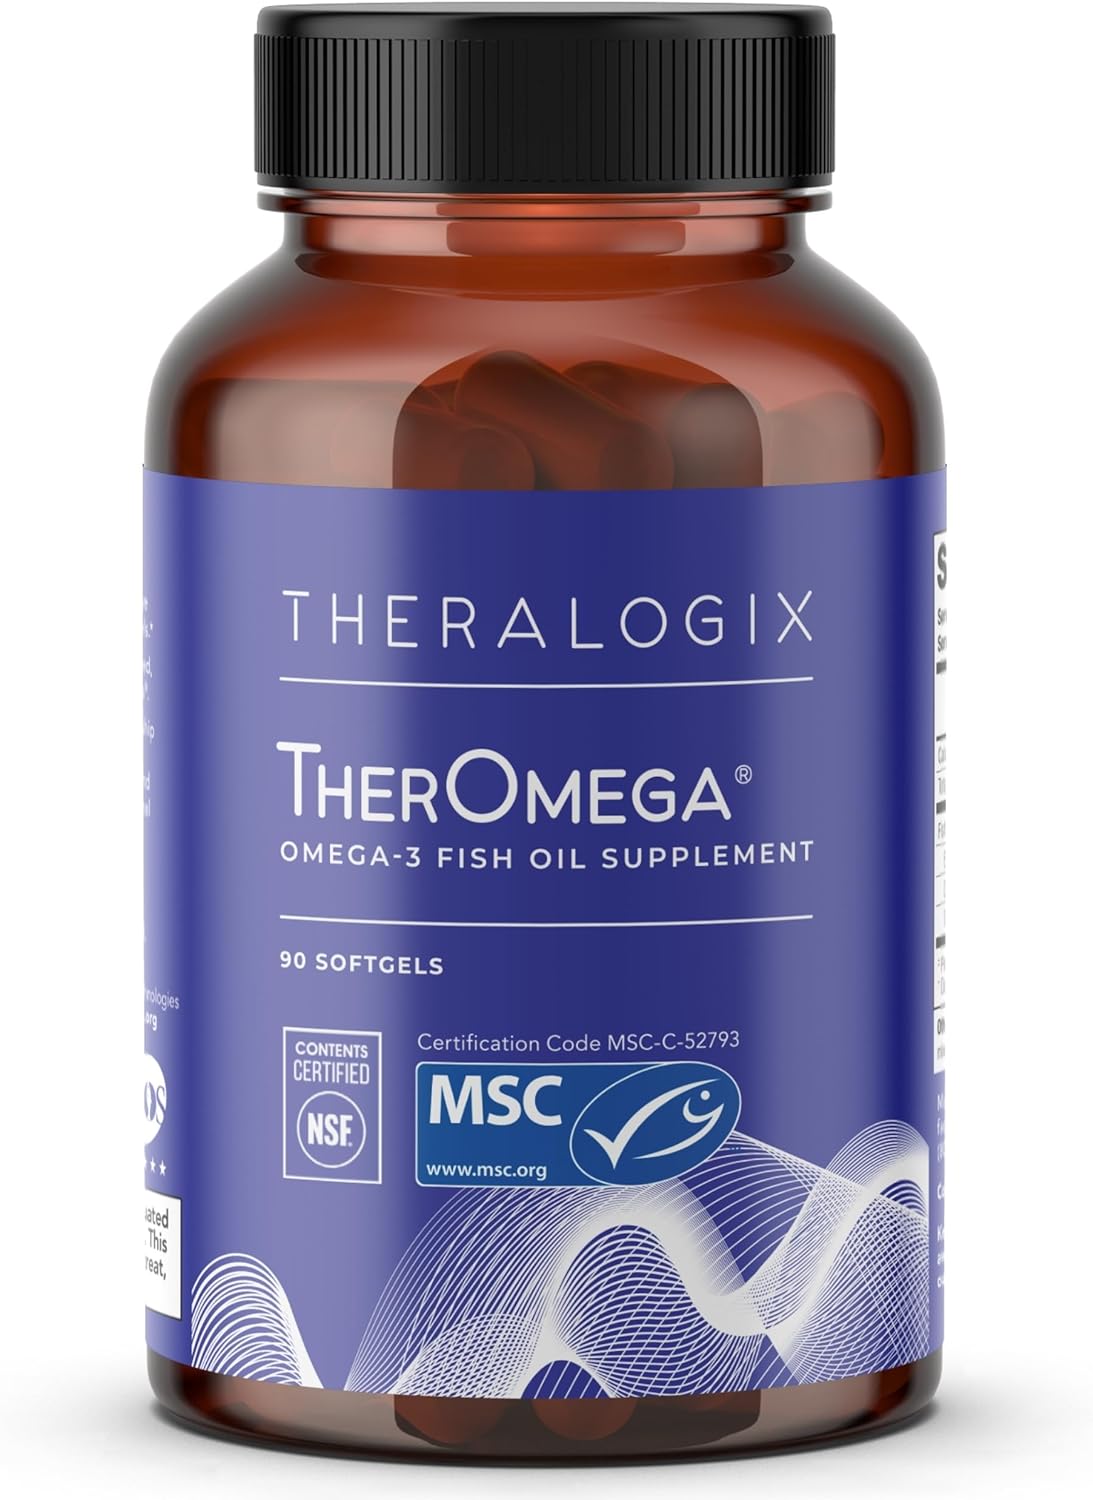 Theralogix TherOmega Omega-3 Fish Oil Supplement - Supports Heart, Brain, Immune & Joint Health* - 700 mg DHA & EPA from Wild Alaska Pollock - Sustainably Sourced - NSF Certified - 90 Softgels